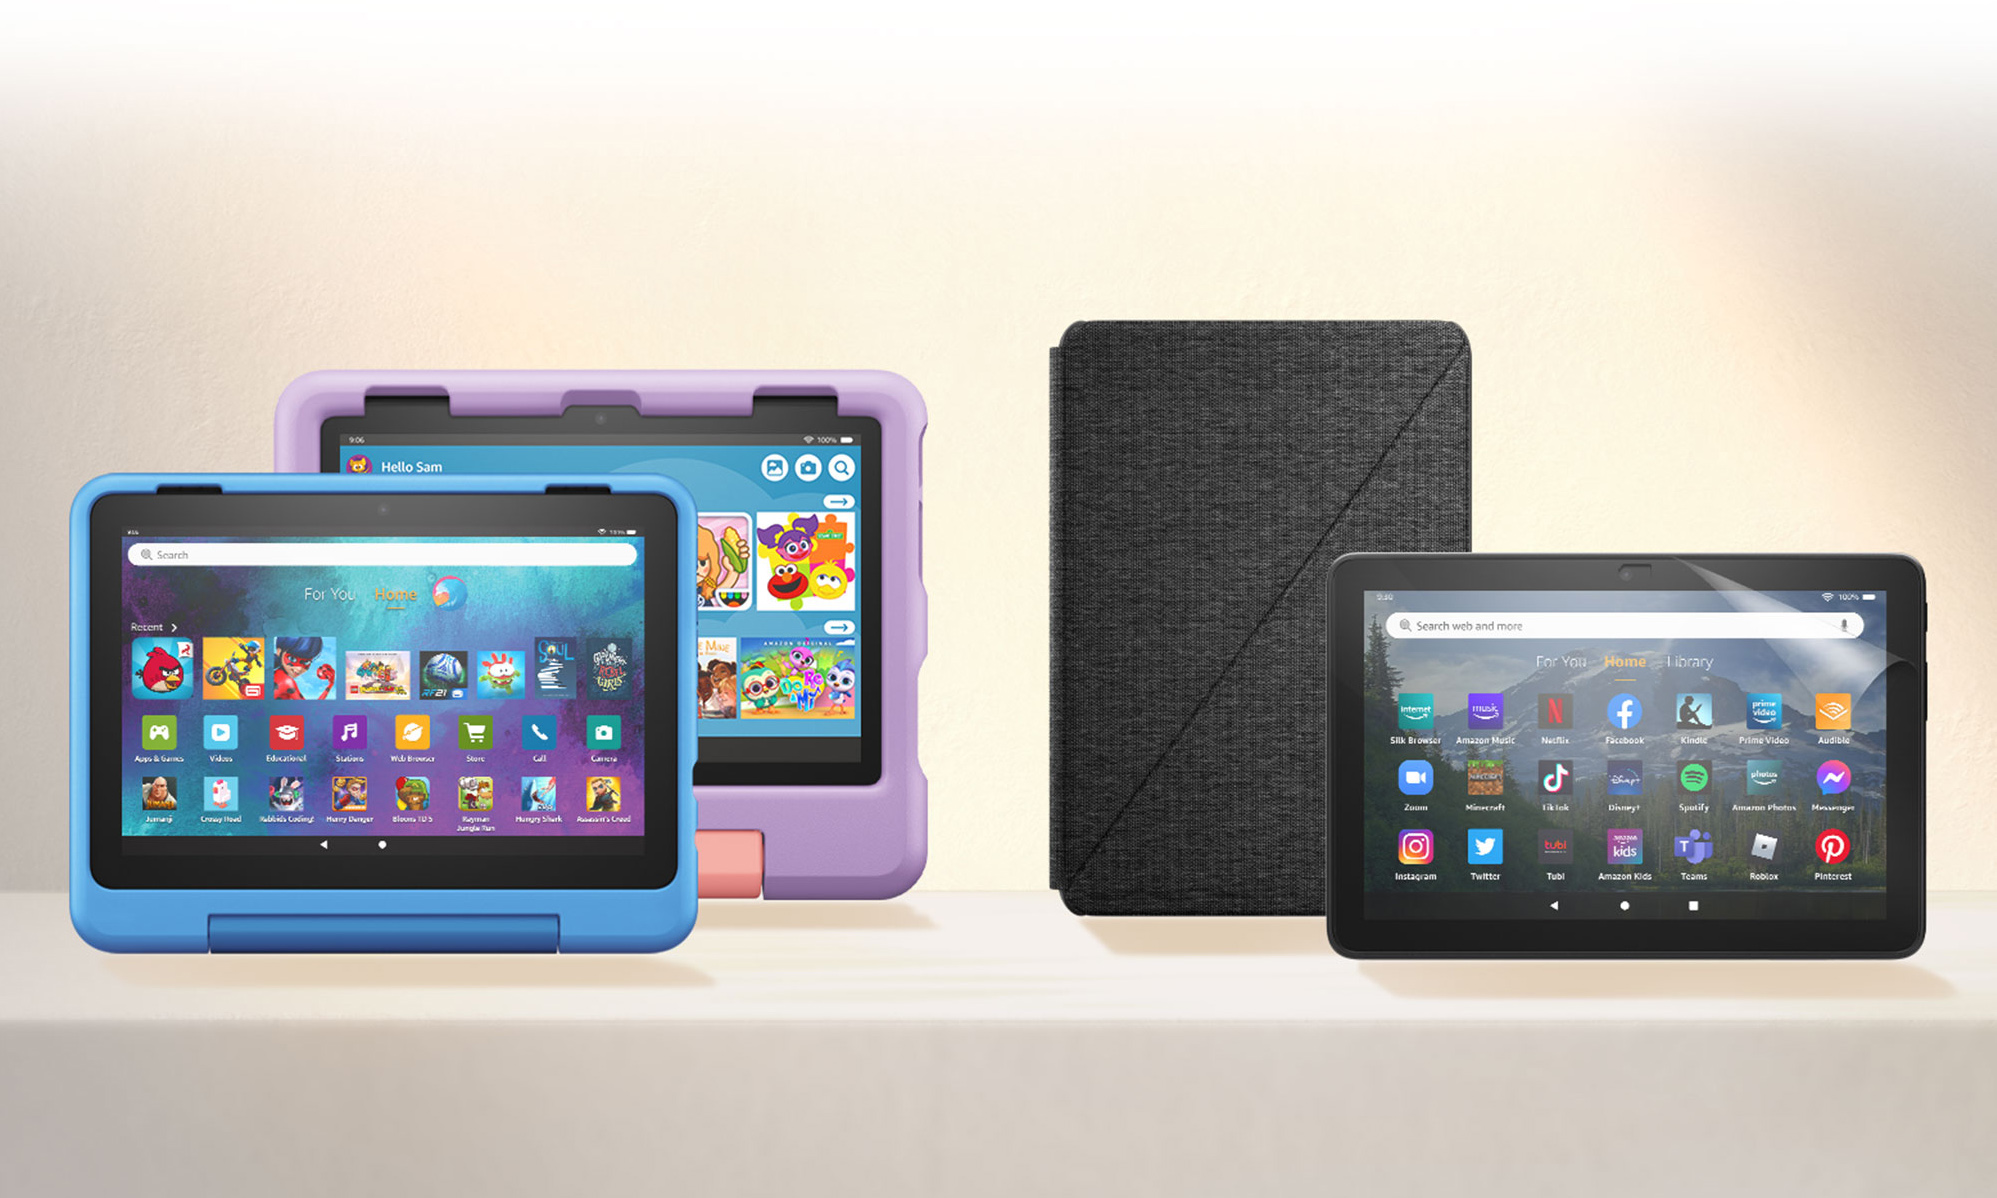 Amazon’s Fire tablets are up to 43 percent off, plus the rest of the week’s best tech deals